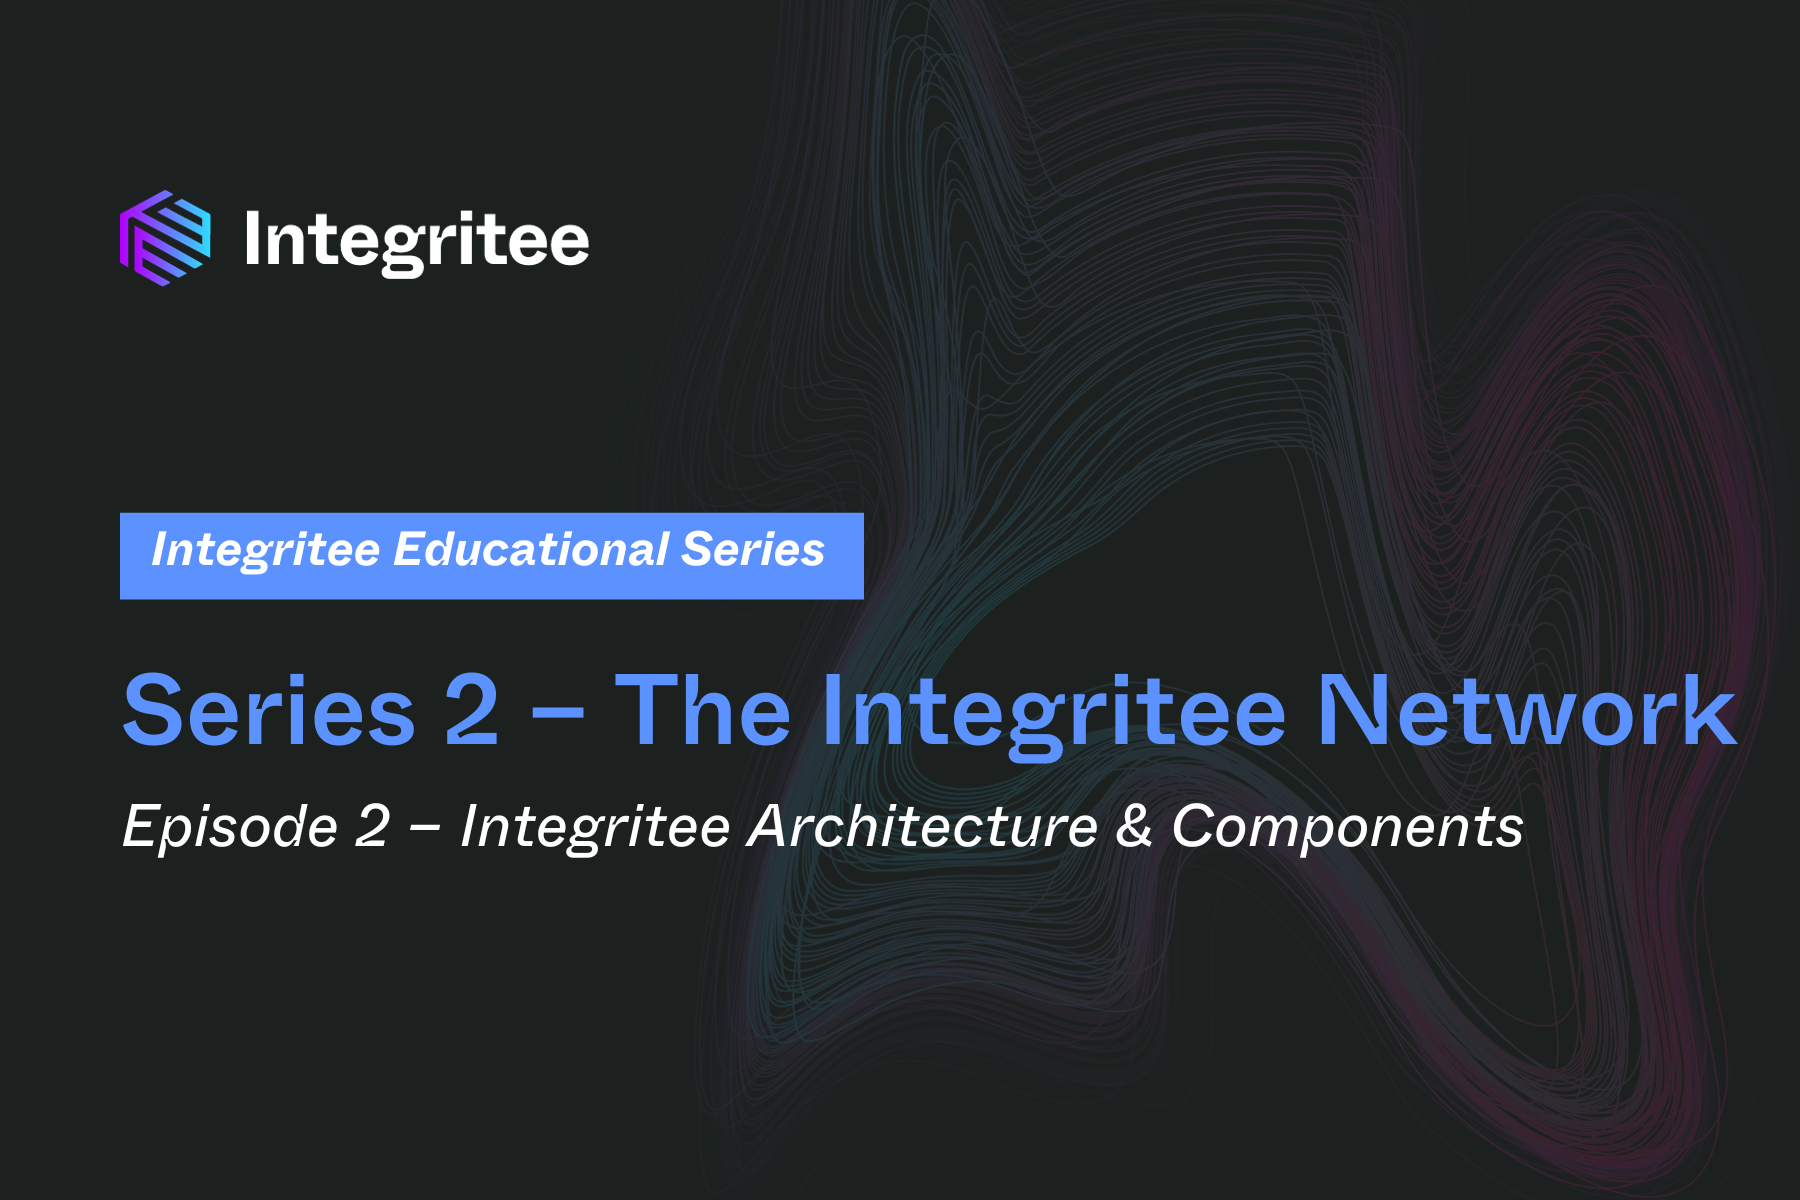 Series 2 – The Integritee Network | Episode 2 – Integritee Architecture & Components